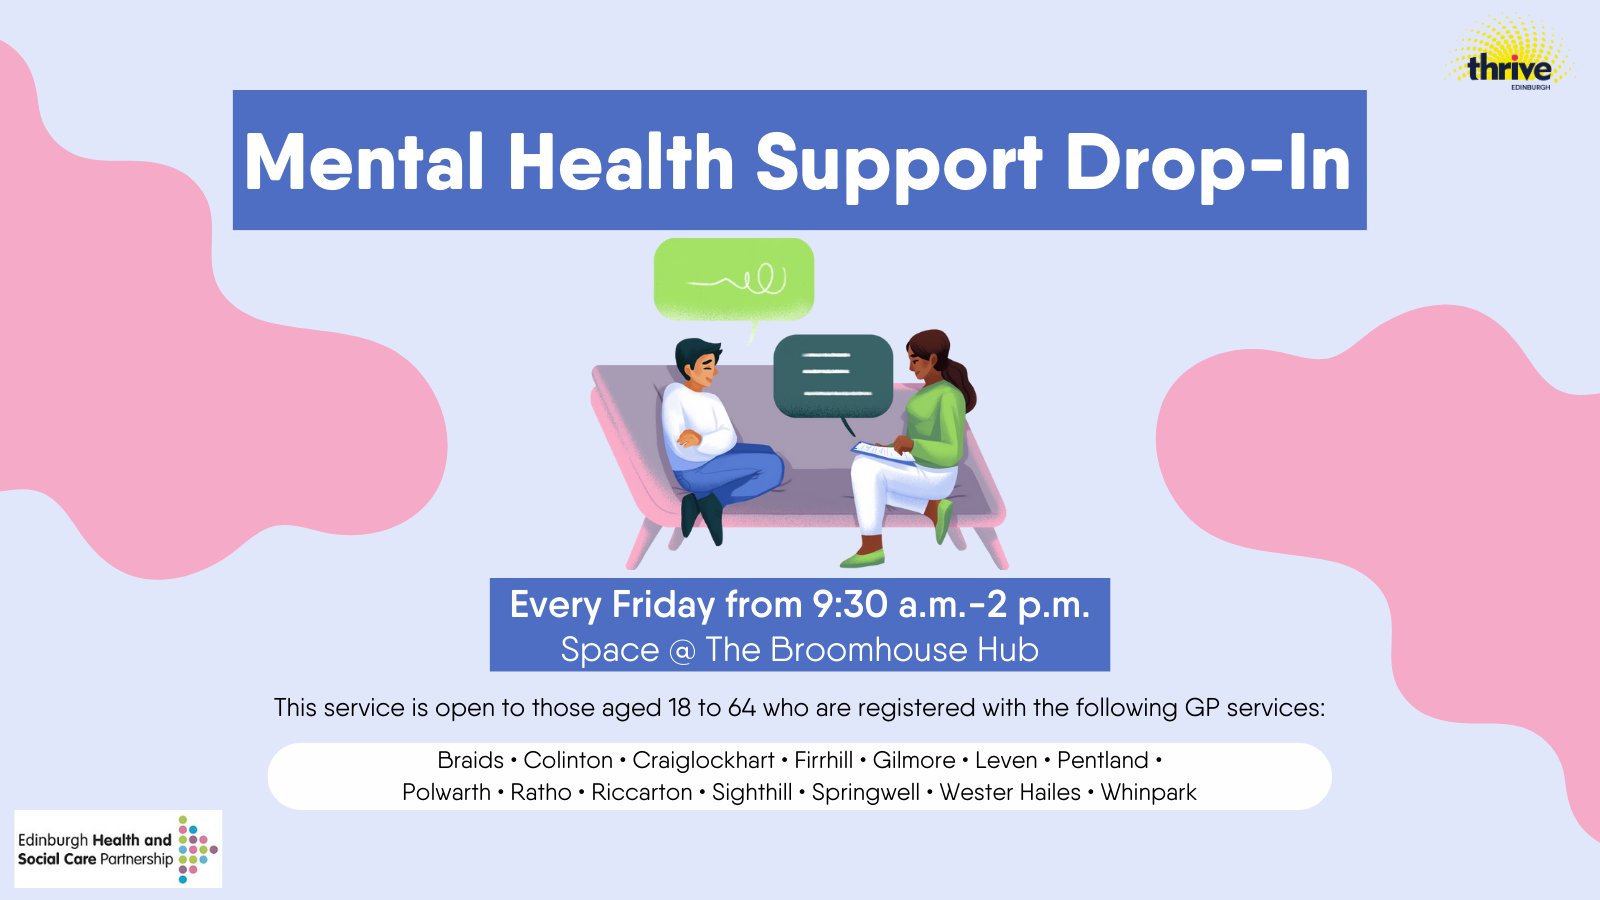 Mental Health Support Drop-in